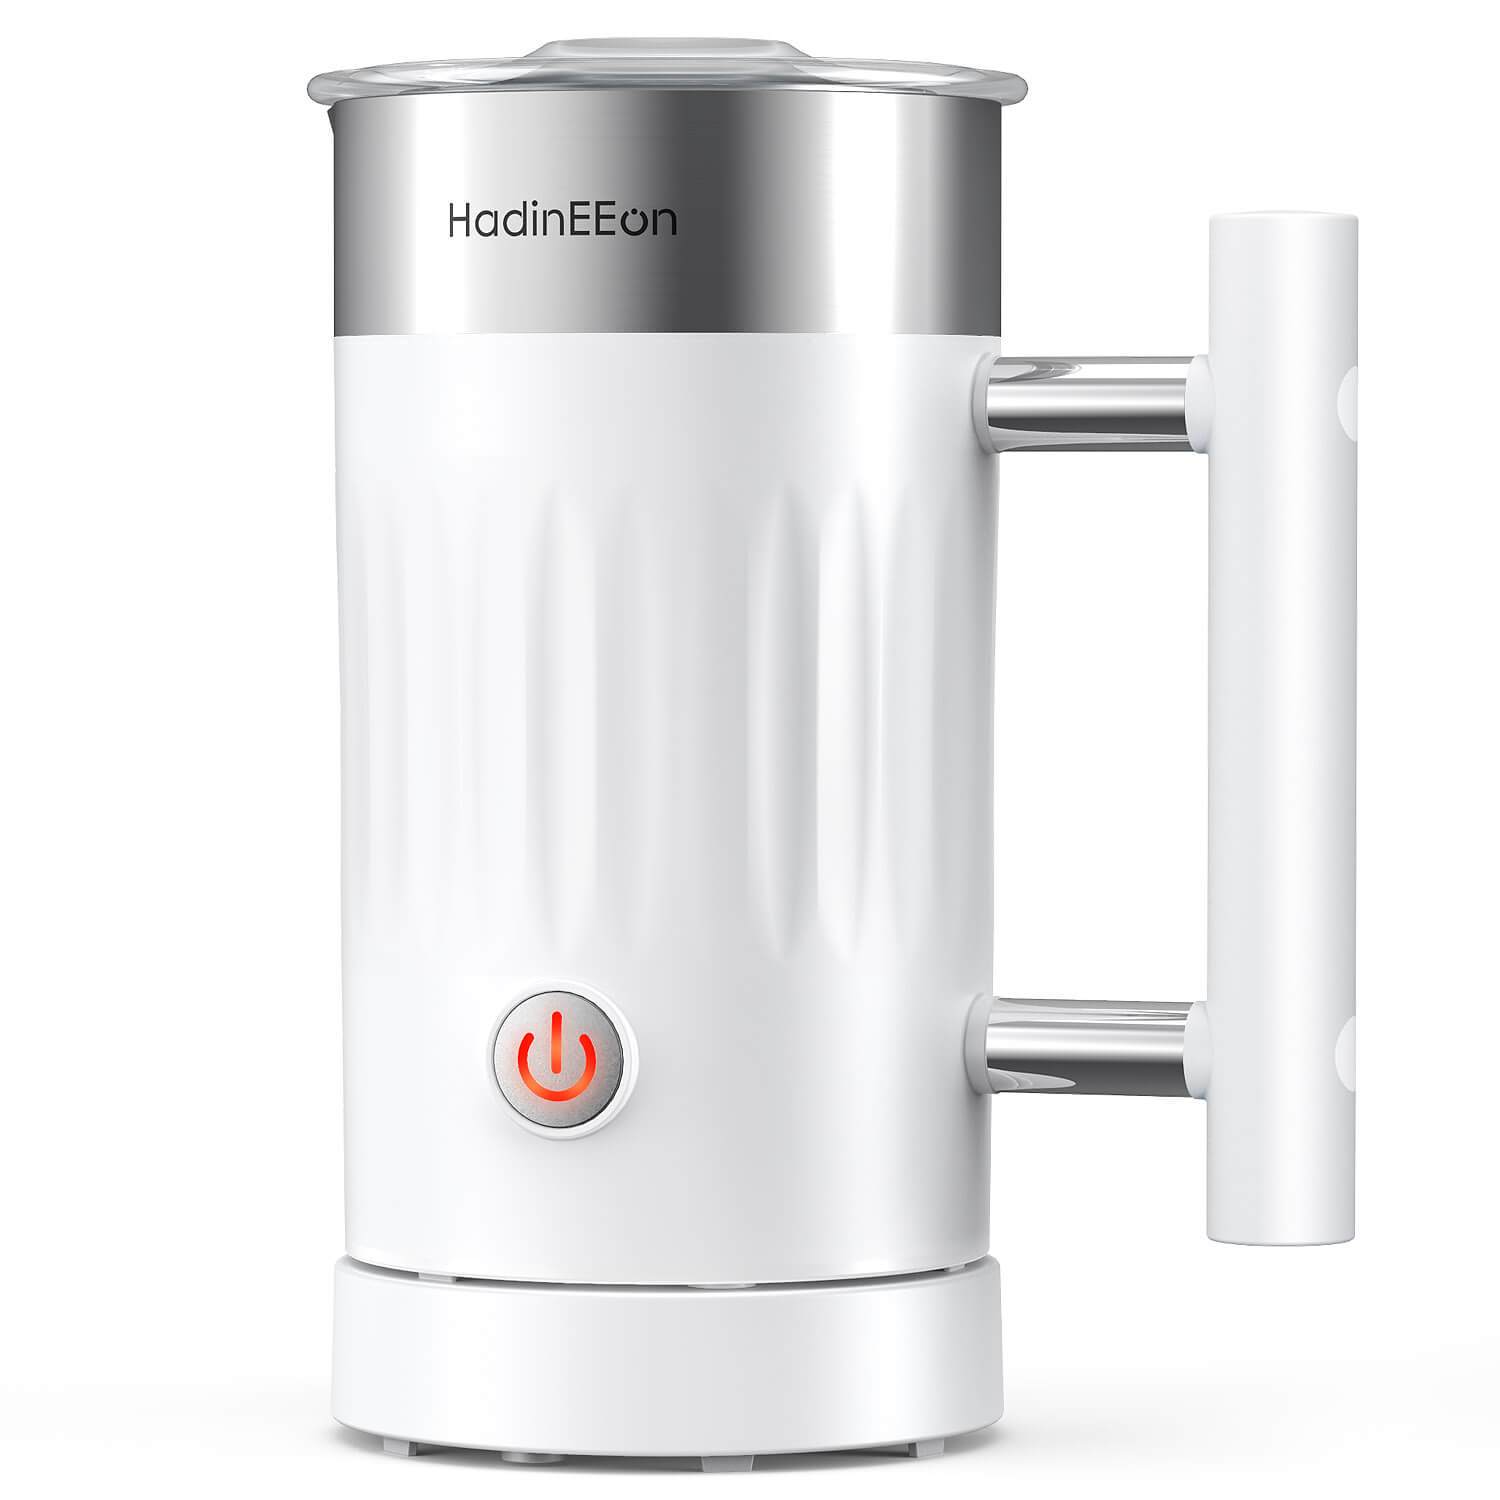 HadinEEon 5 in 1 Electric Magnetic Milk Frother for Coffee, Latte, Cap Featured Image